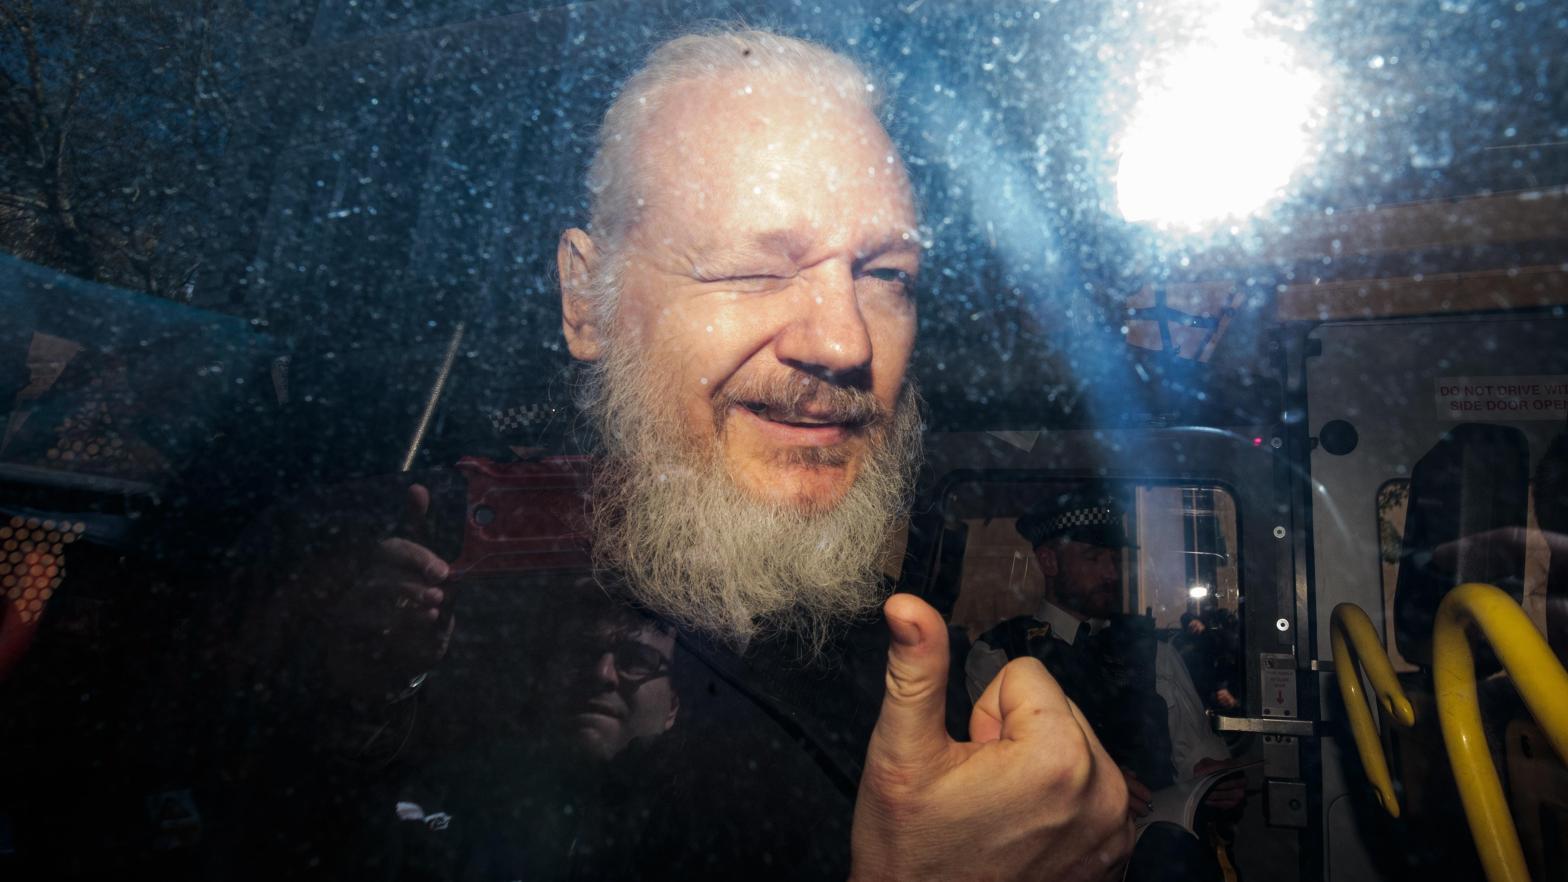 Julian Assange has 14 days to file an appeal against his extradition, which was approved today. (Image: Jack Taylor, Getty Images)